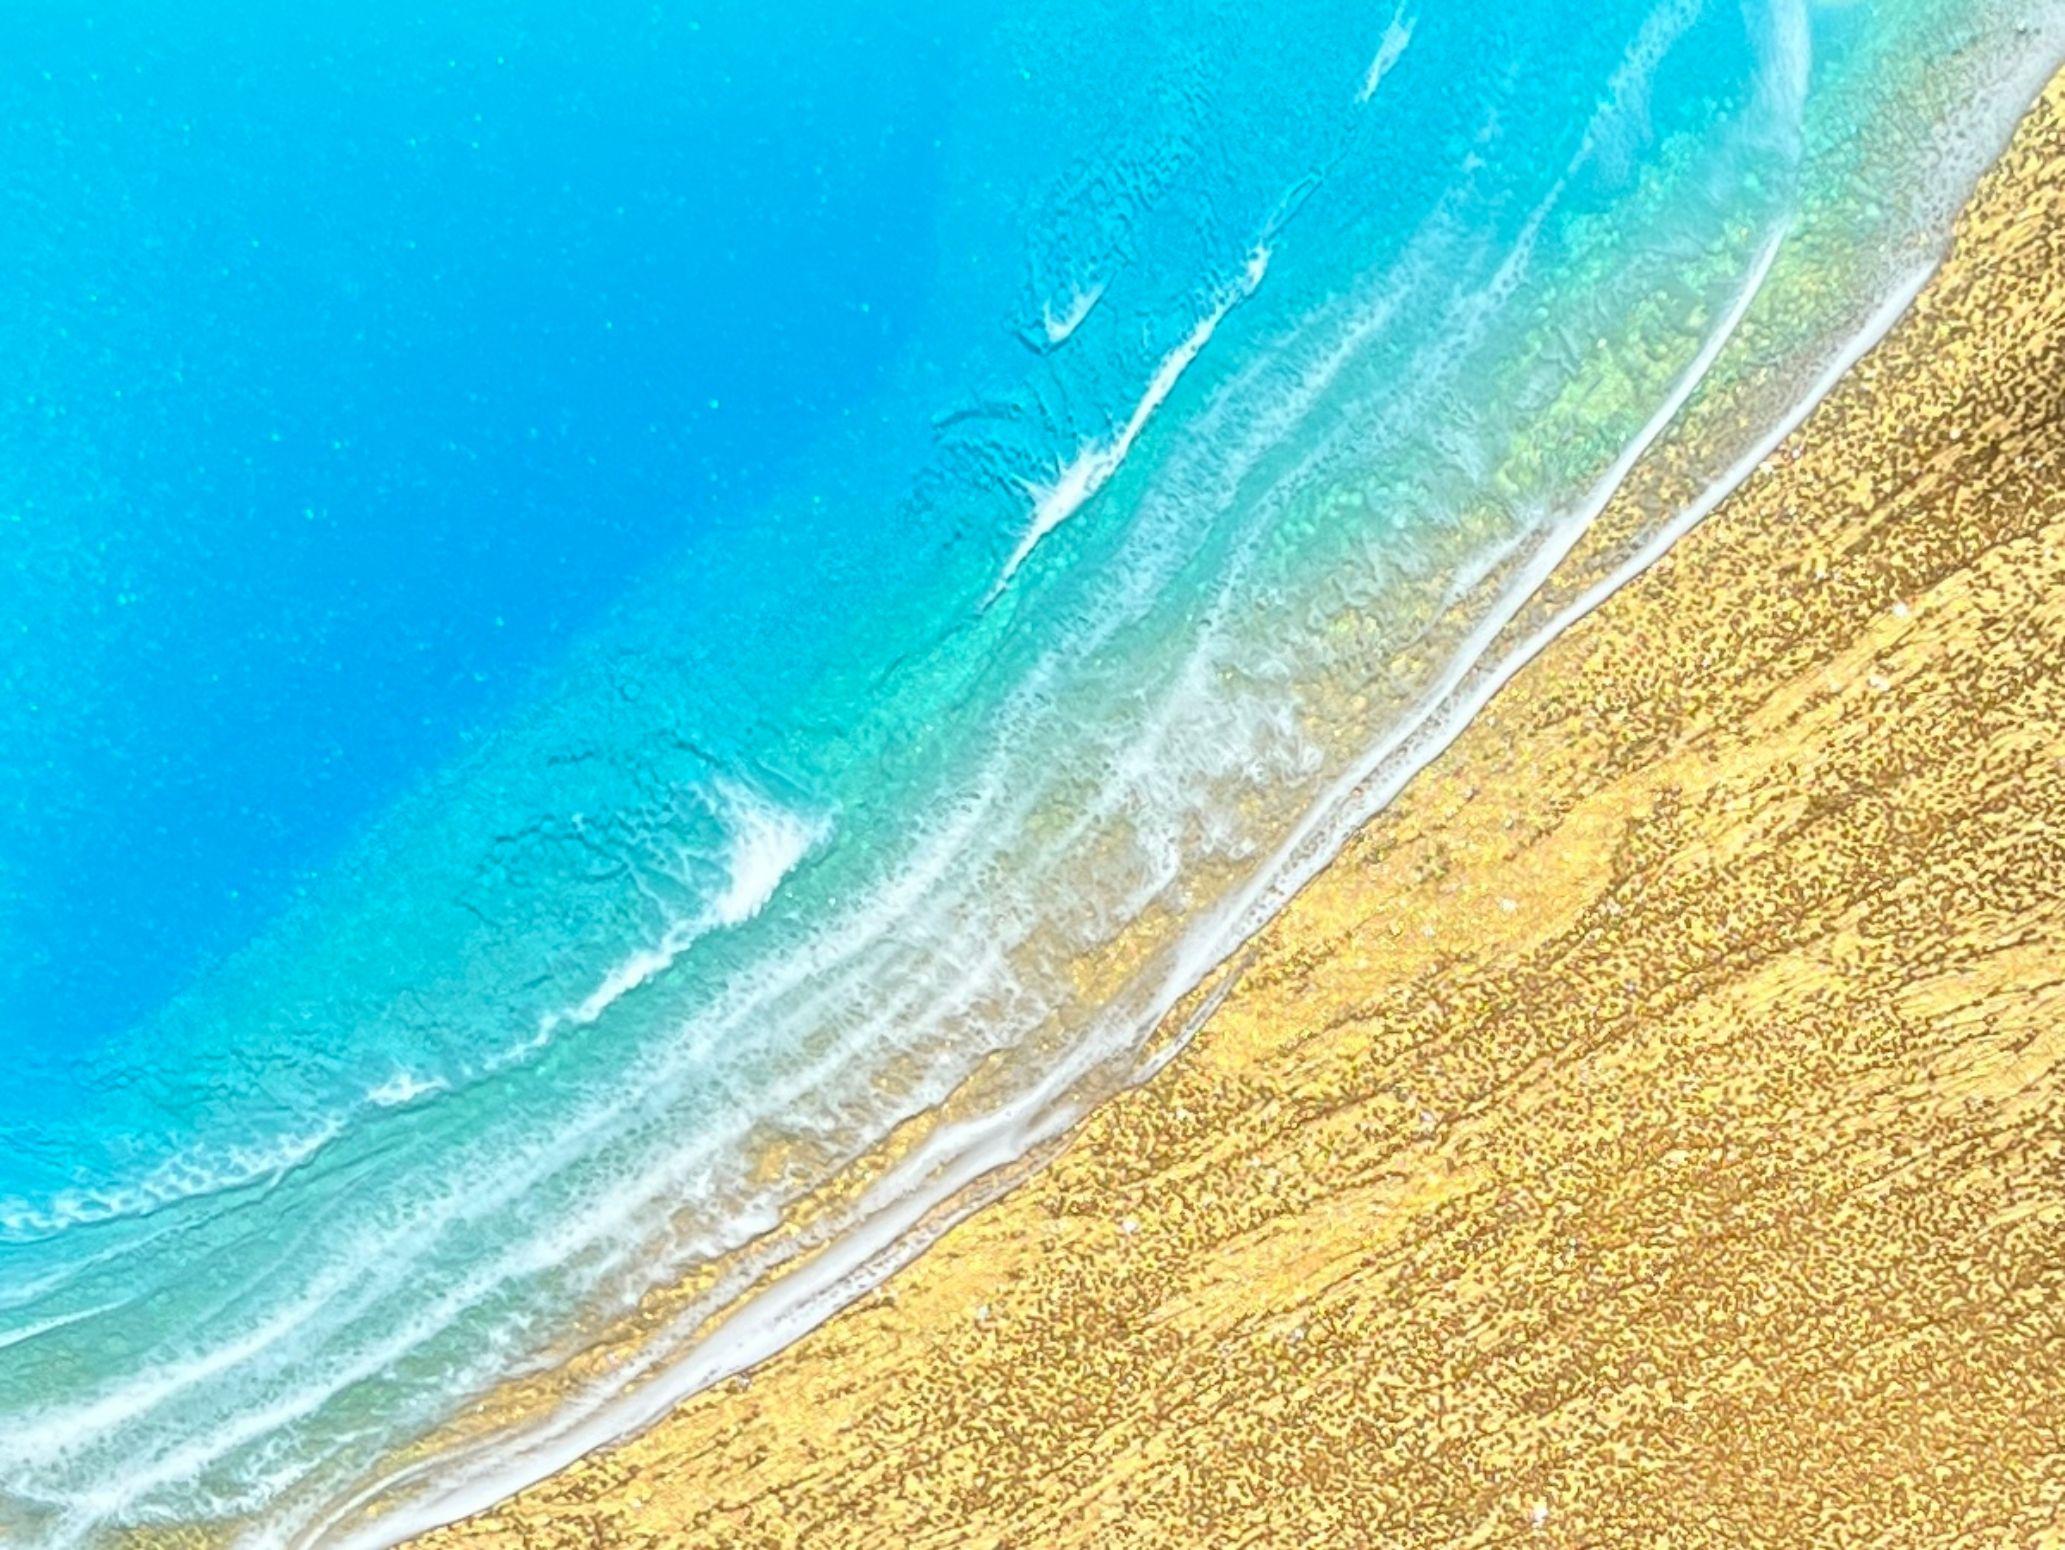 Gold sand aerial ocean painting   Original, one-of-a-kind, hand painted, inspired by the view of The Bahamas and Turks And Caicos Islands seen from the airplane in my last vacation there  Different shades of blue, turquoise, teal, aqua, gold and